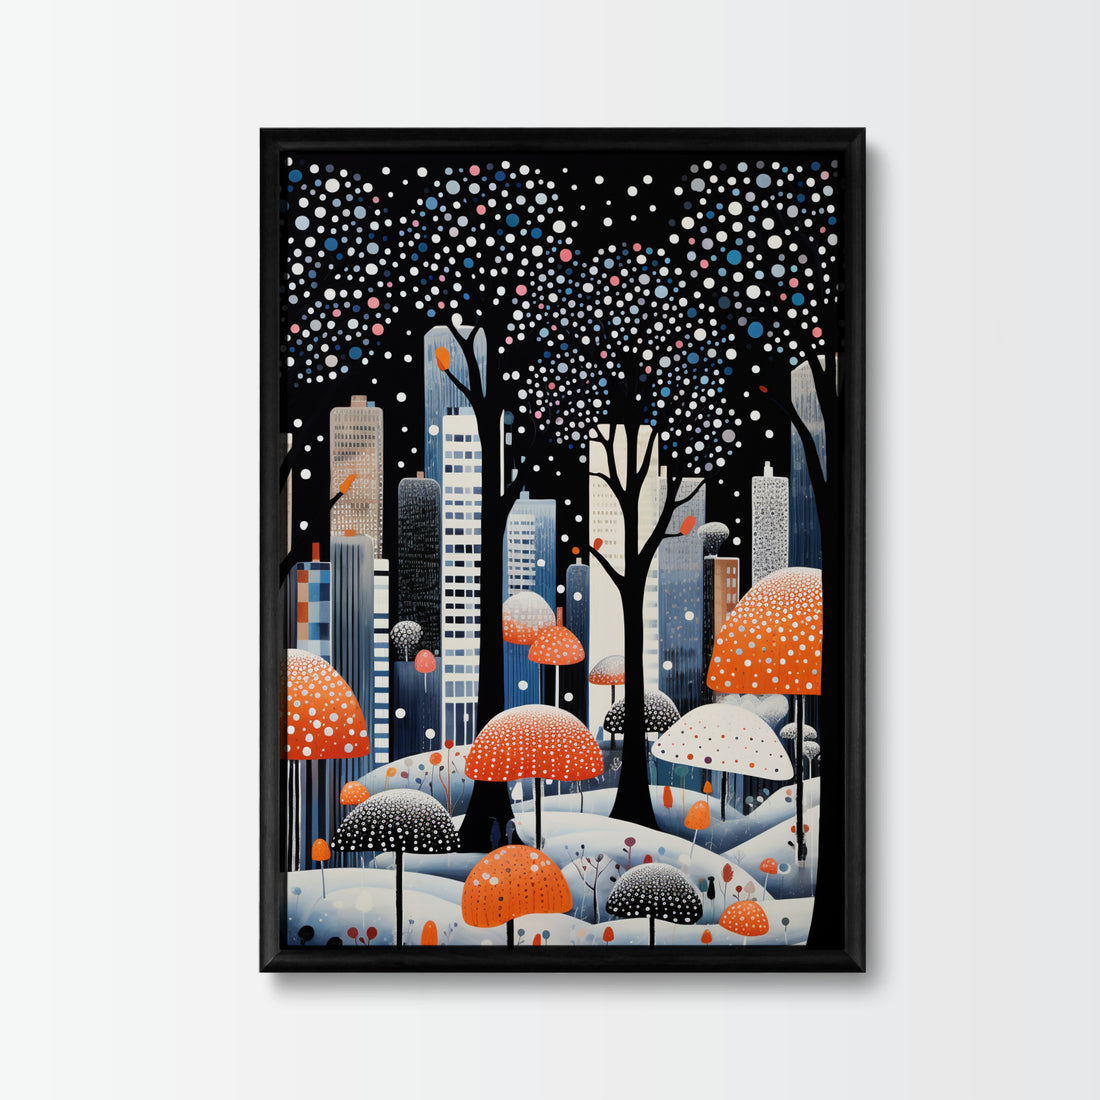 Poster Cityscape Polkadot - Add sophistication to your home